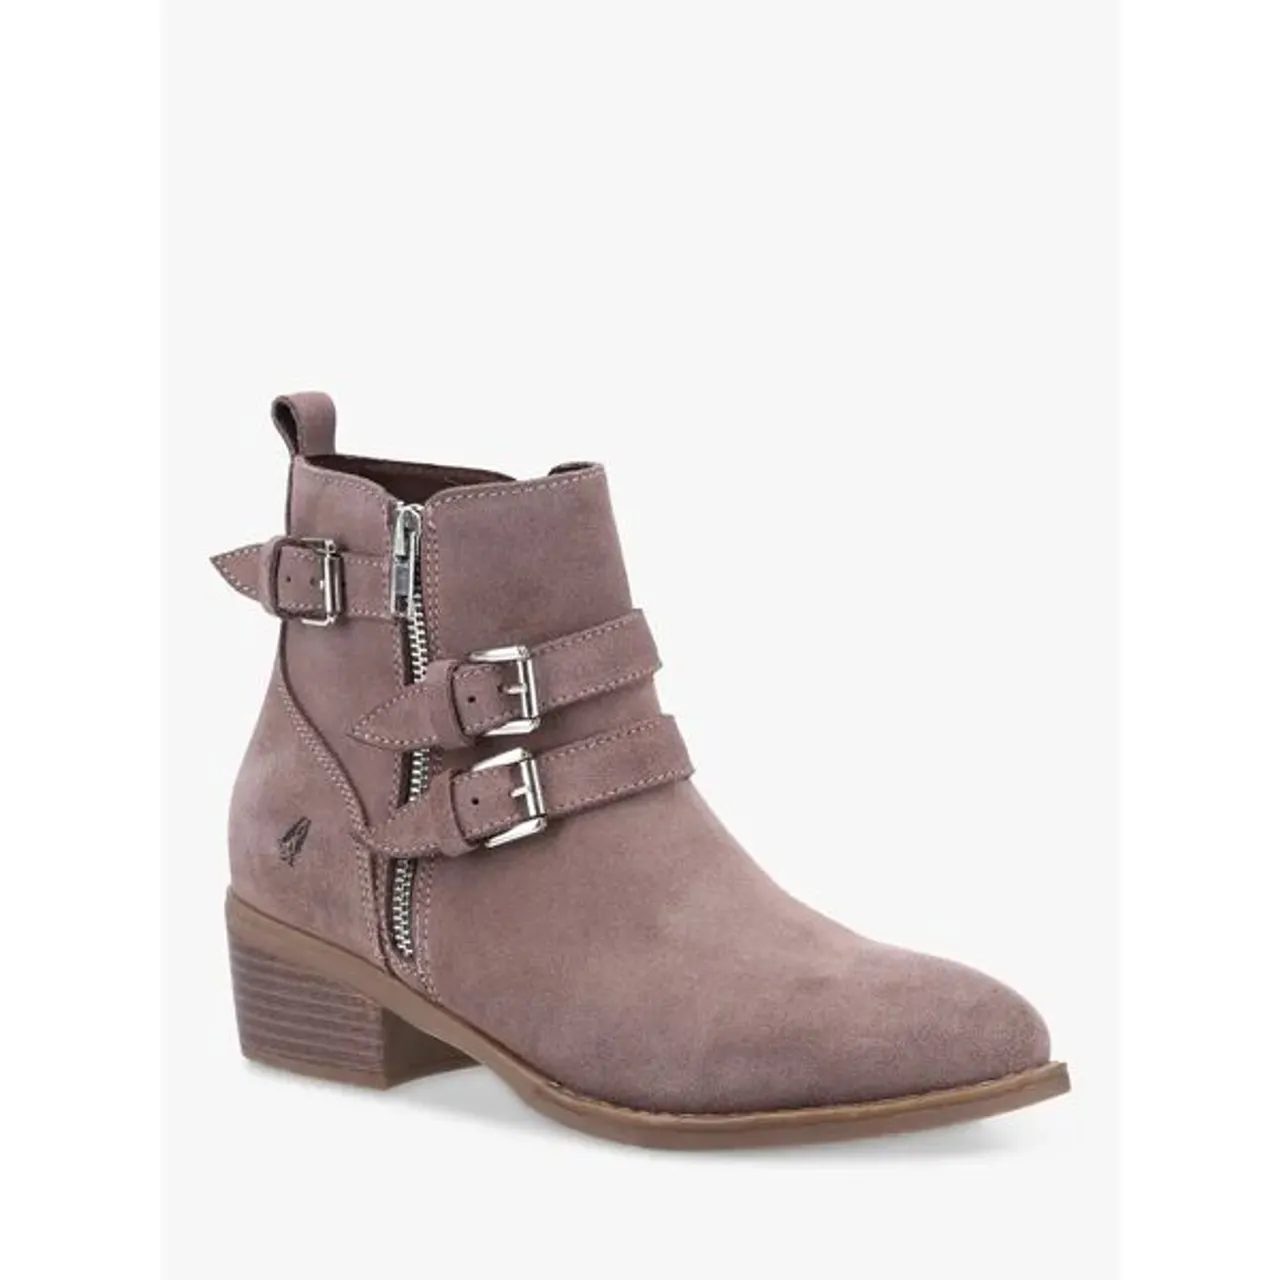 Hush Puppies Jenna Suede Ankle Boots - Taupe - Female